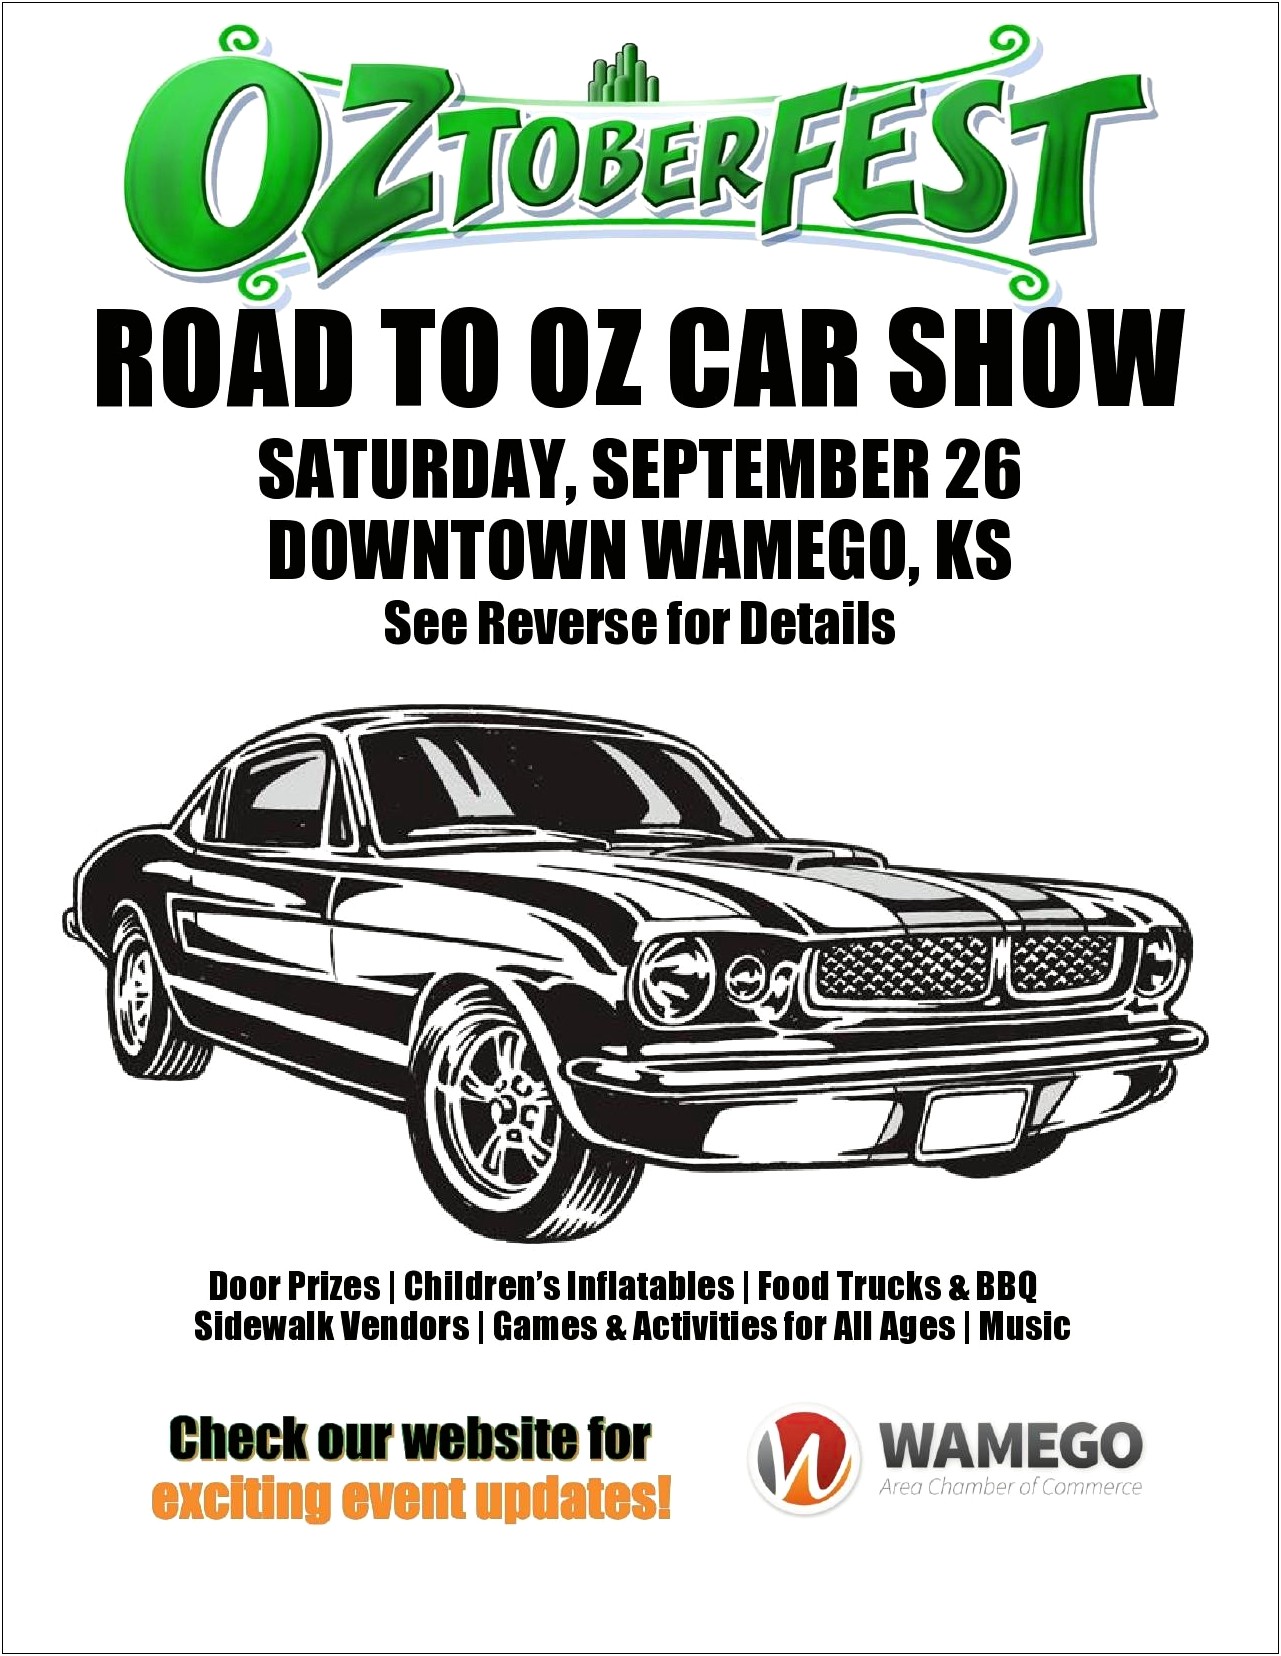 Free Car Show Flyer Template Word